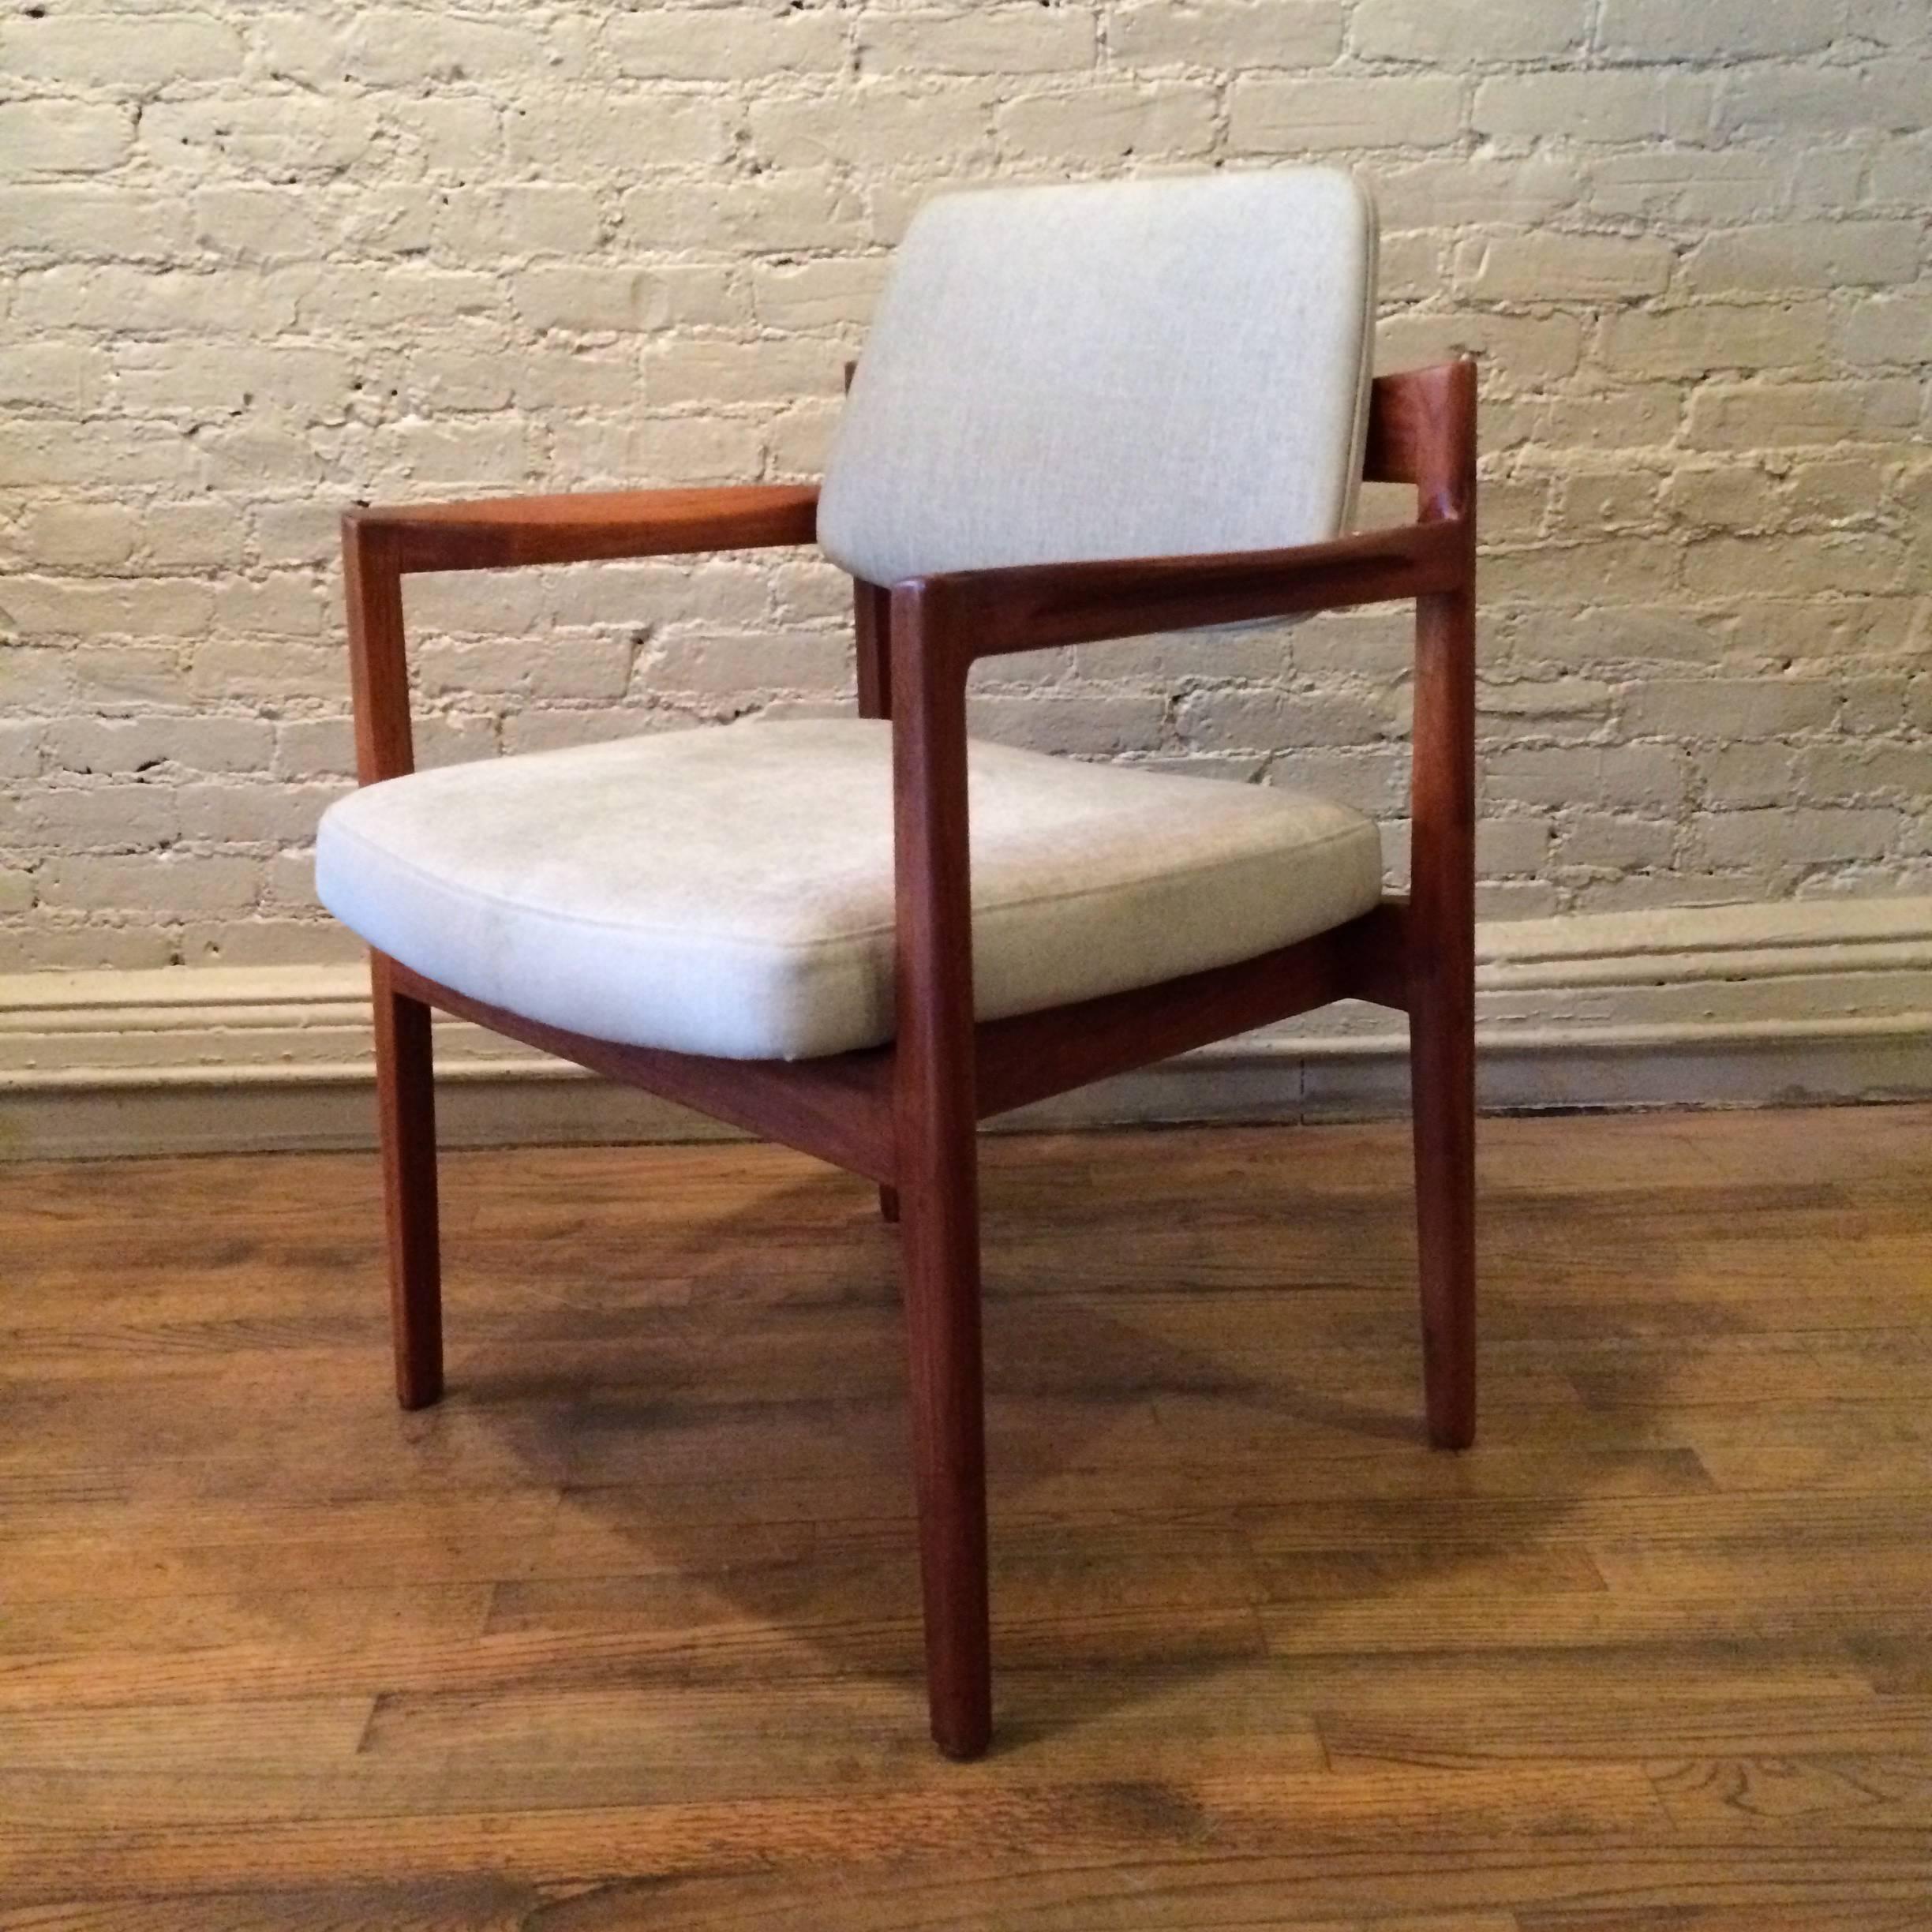 Mid-Century Modern, teak, upholstered armchair by Jens Risom is newly upholstered and finished.